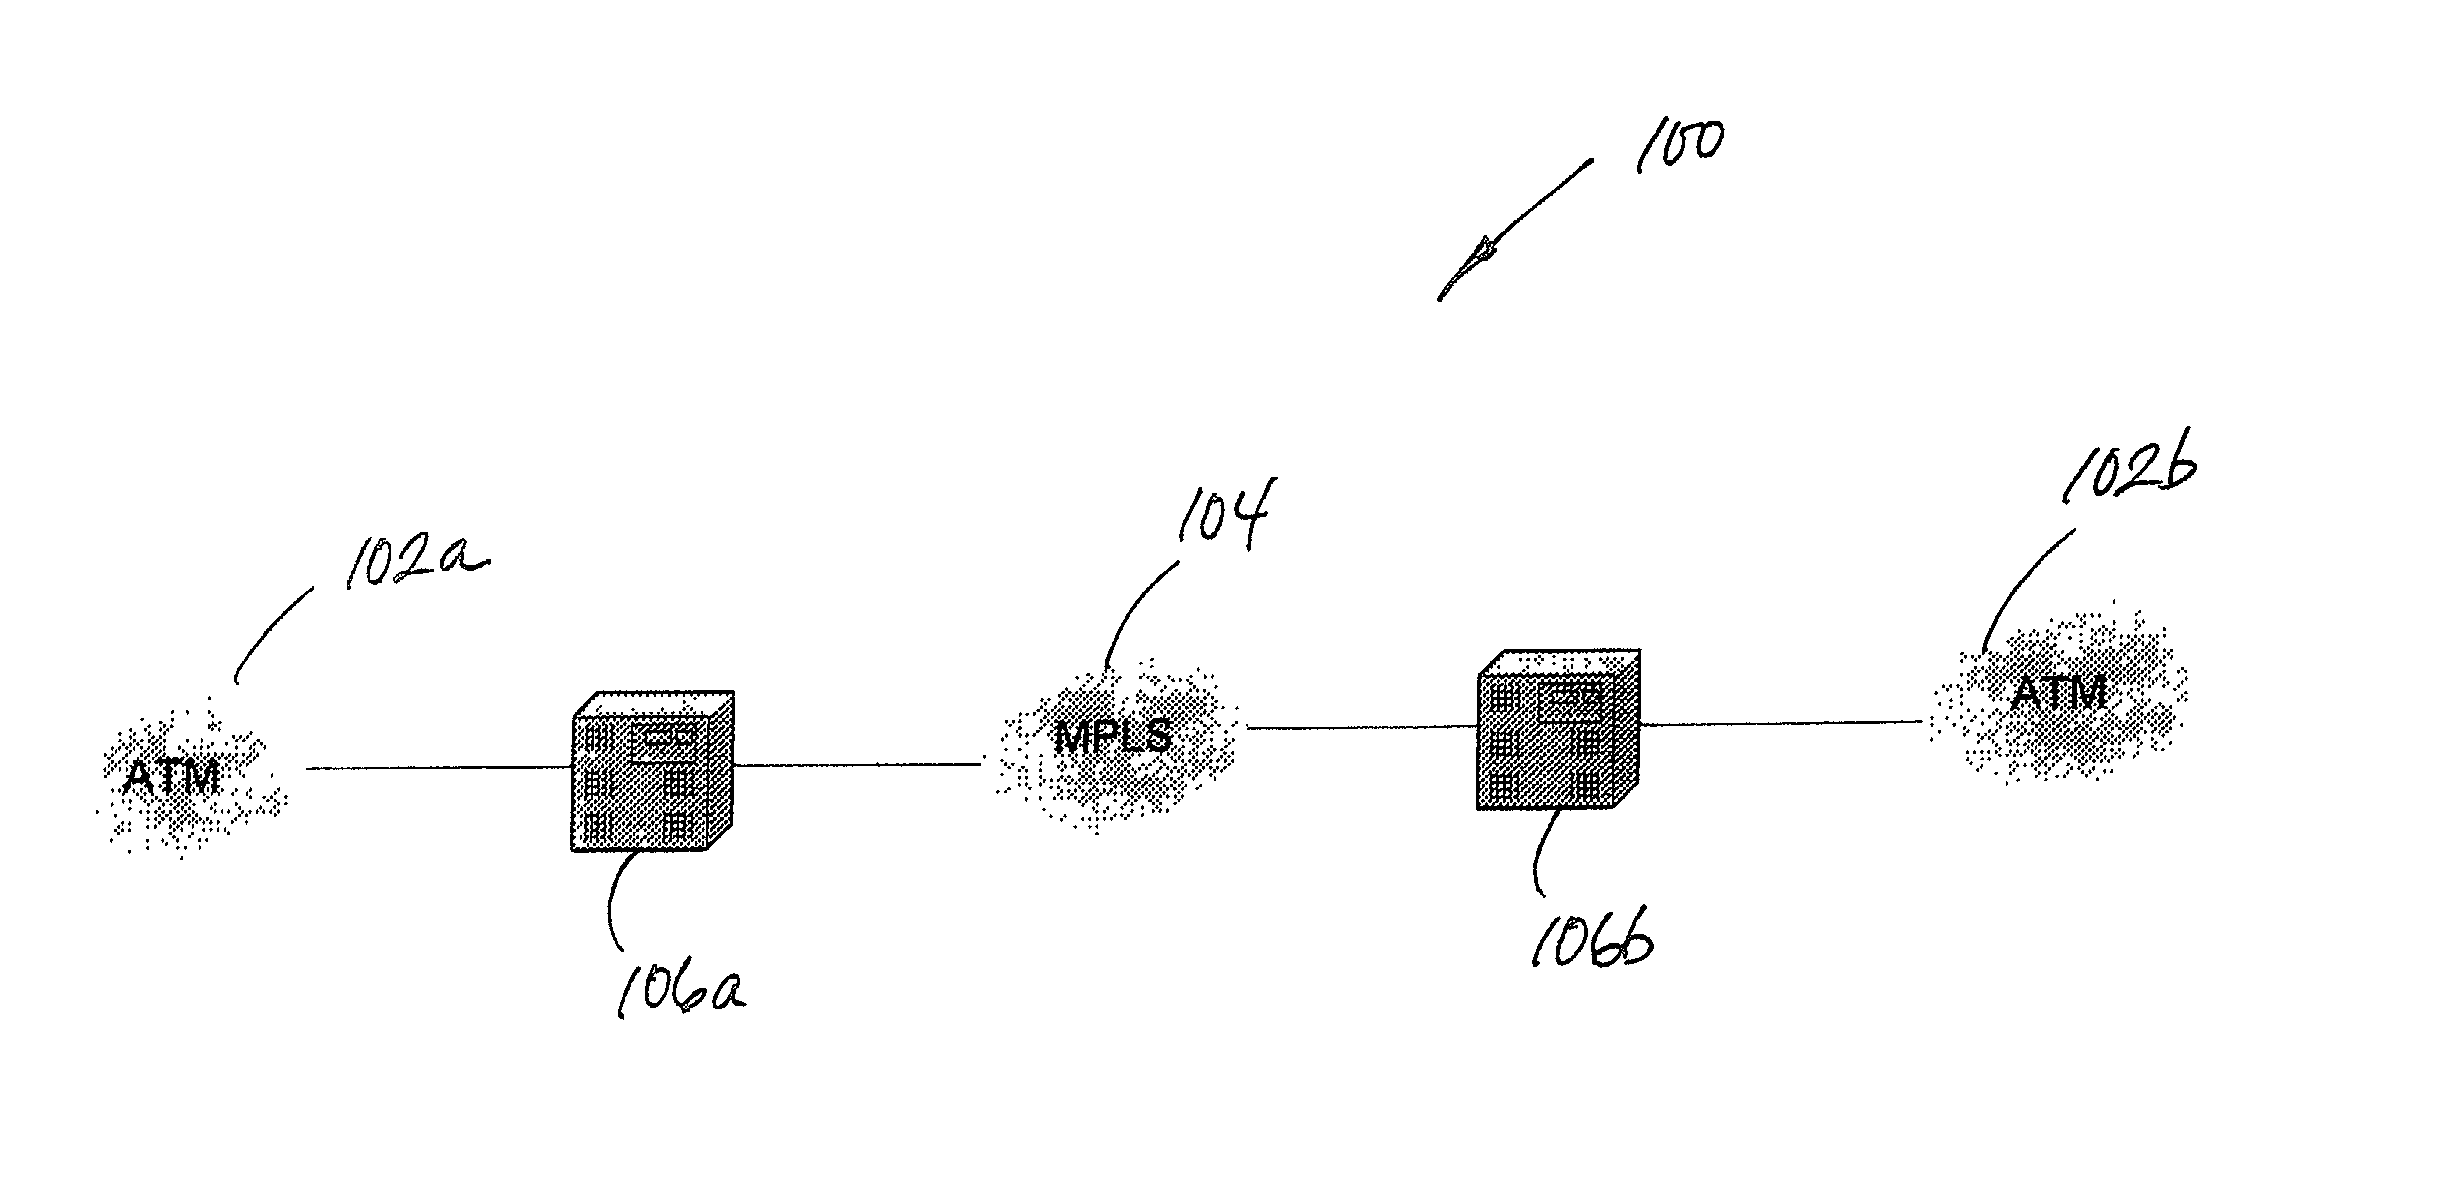 Method and system for mediating traffic between an asynchronous transfer mode (ATM) network and an adjacent network